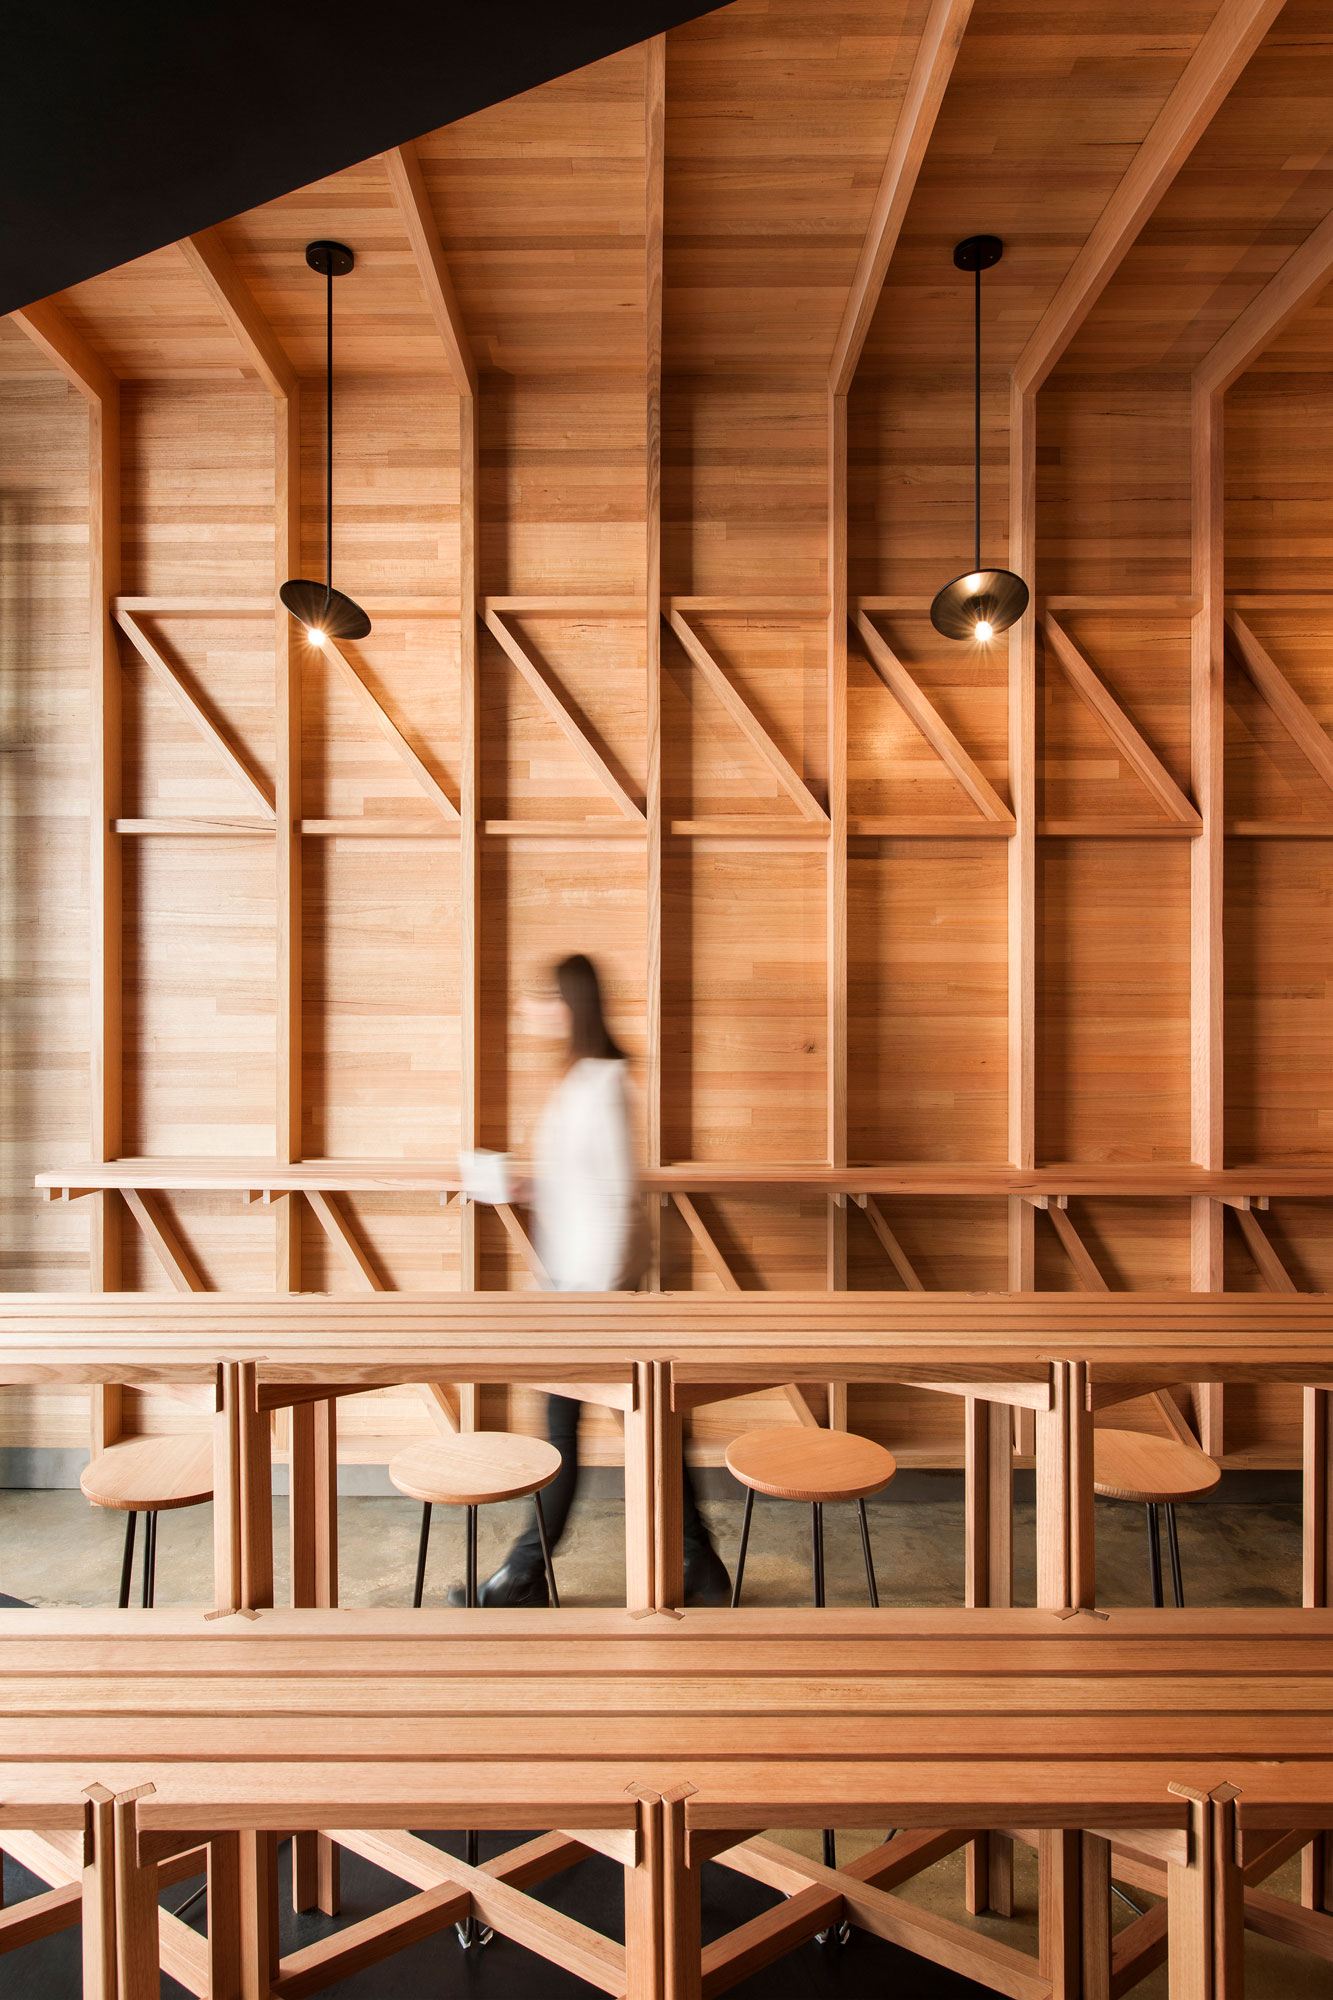 Yellowtrace – Adelaide Architectural Workshop studio gram